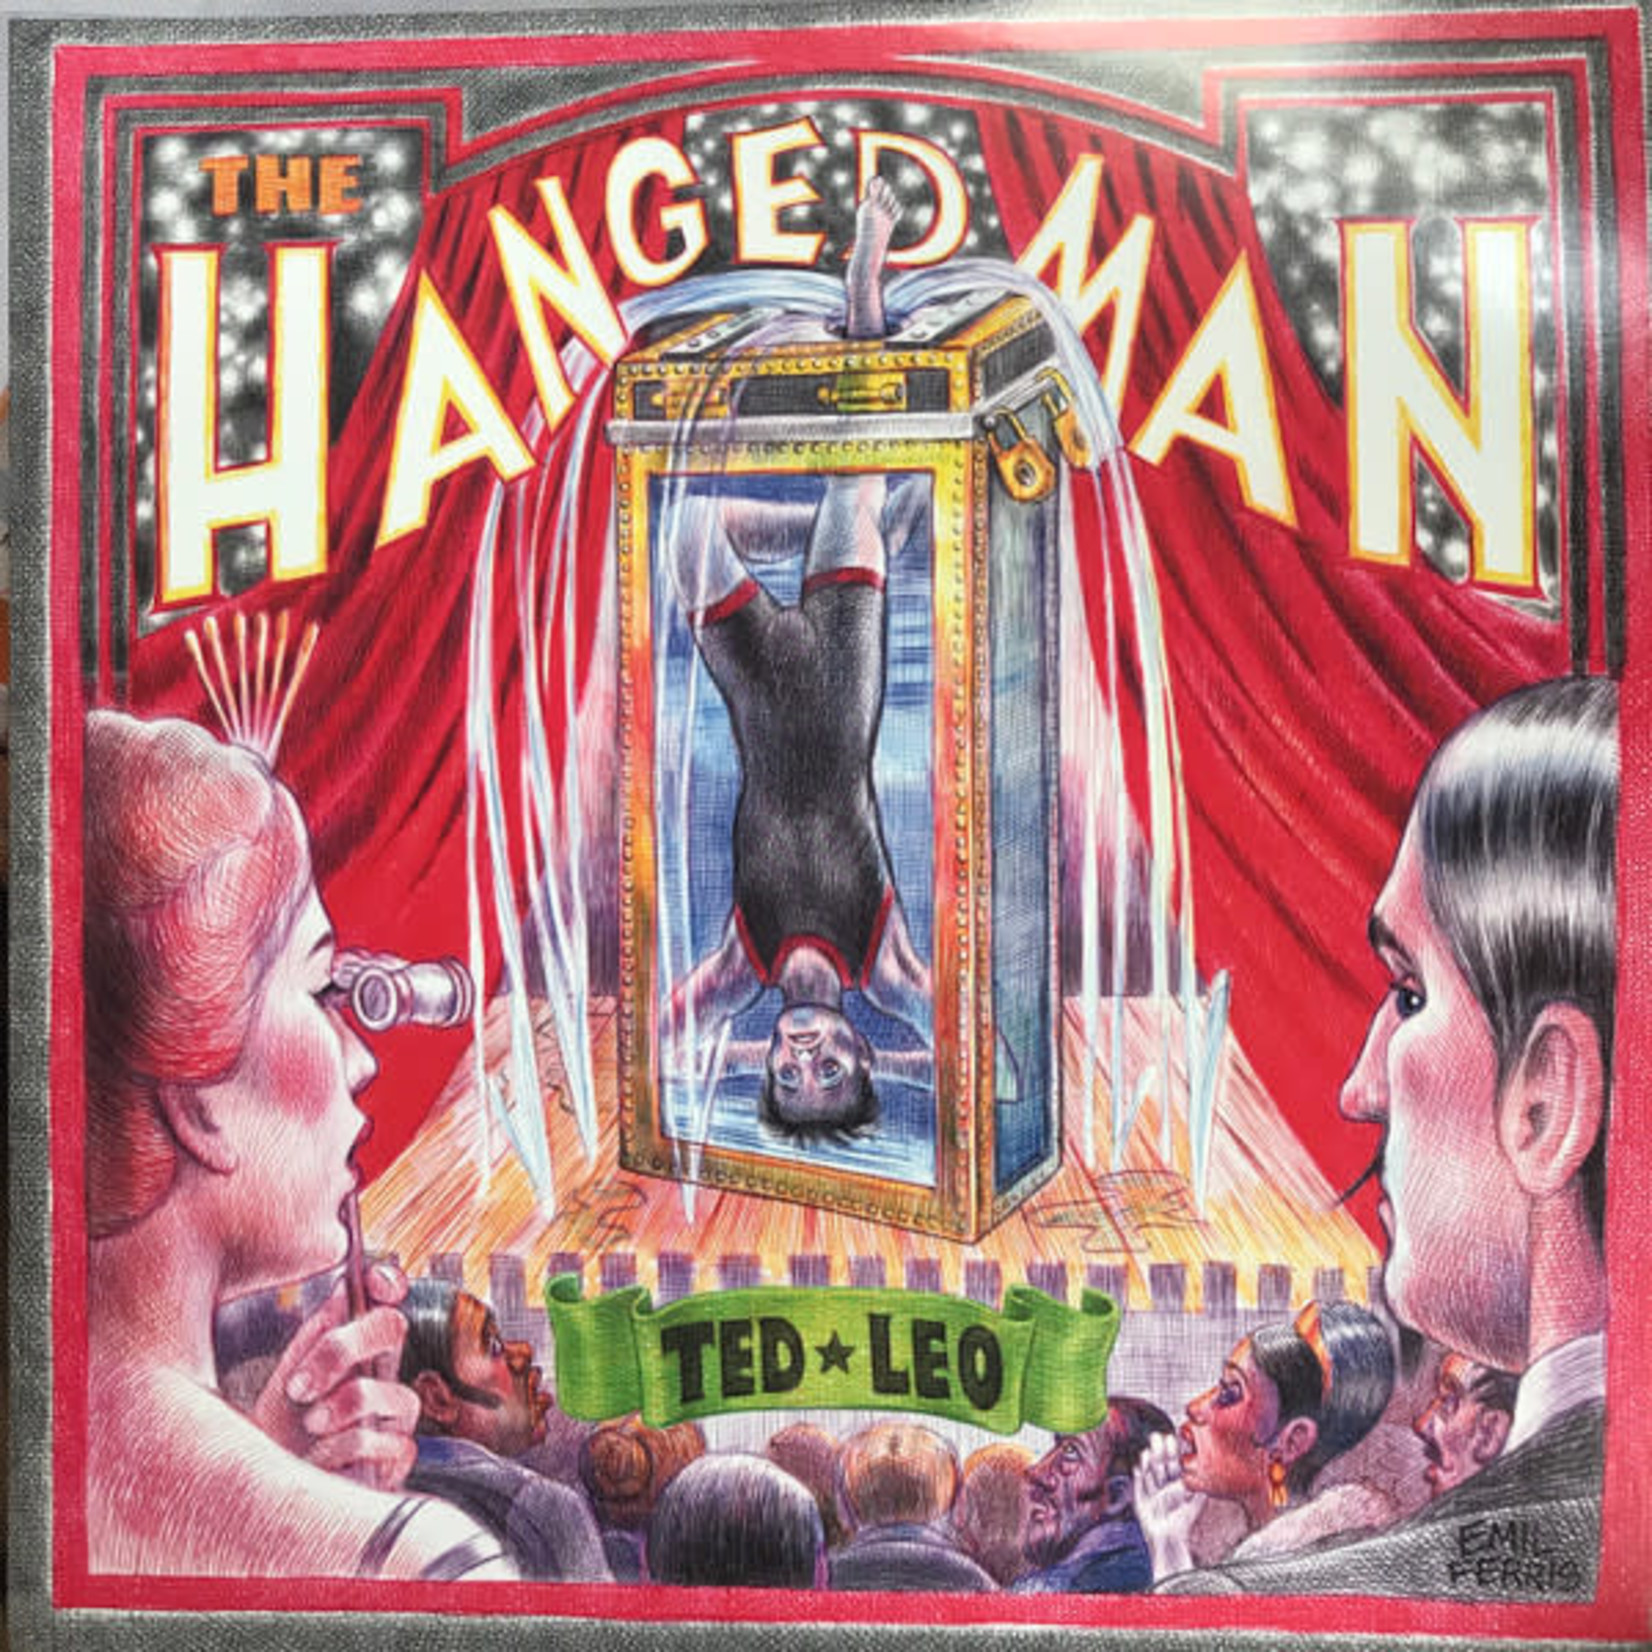 Ted Leo - The Hanged Man (2LP) {VG+/VG+}